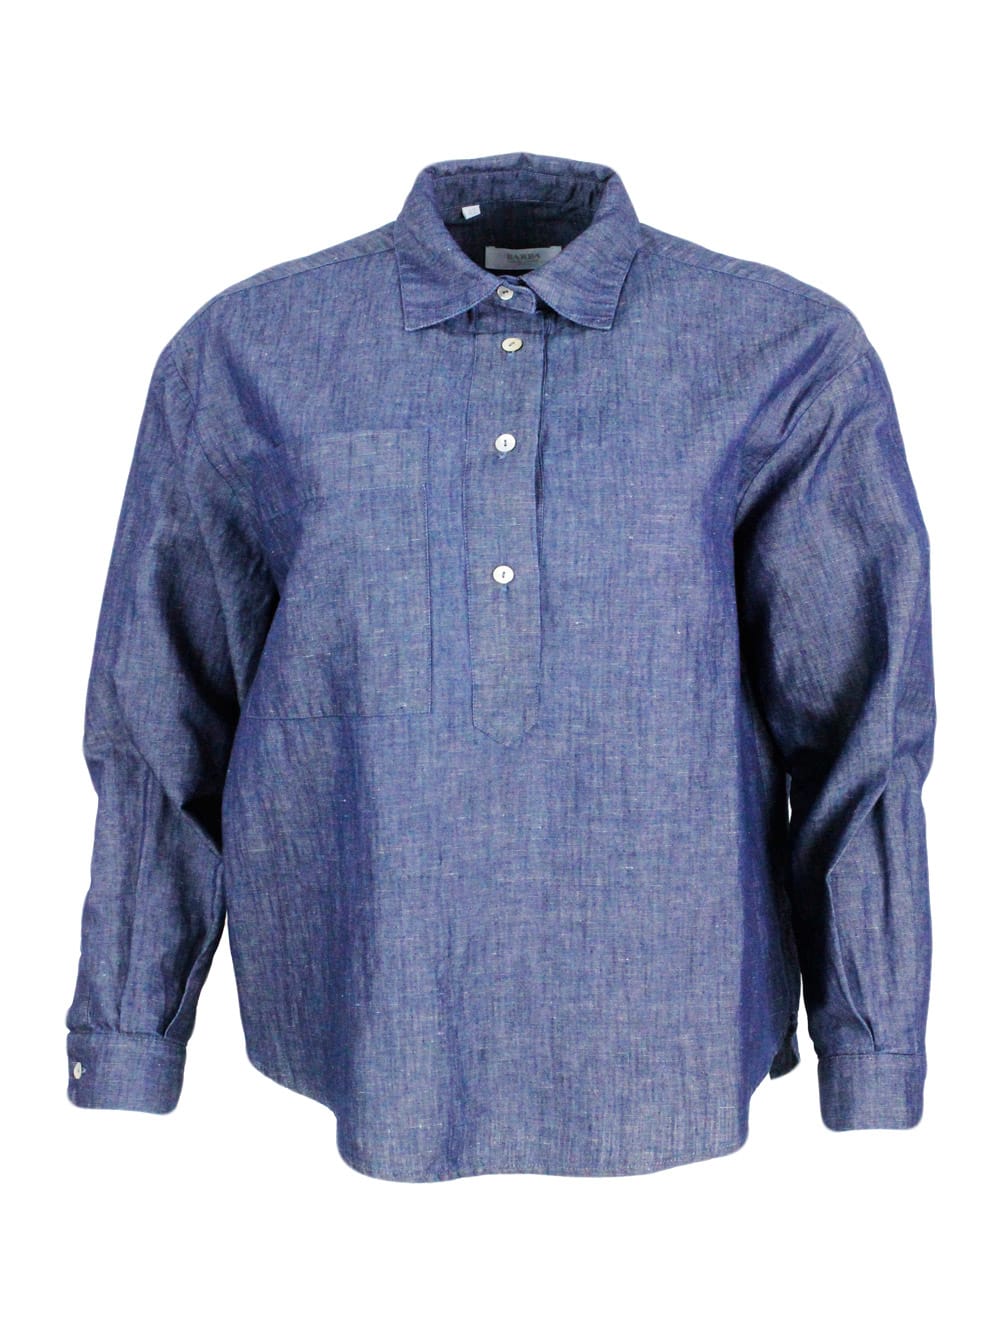 Lightweight Denim-effect Pull-on Shirt In Linen Cotton With Four Buttons And Chest Pocket